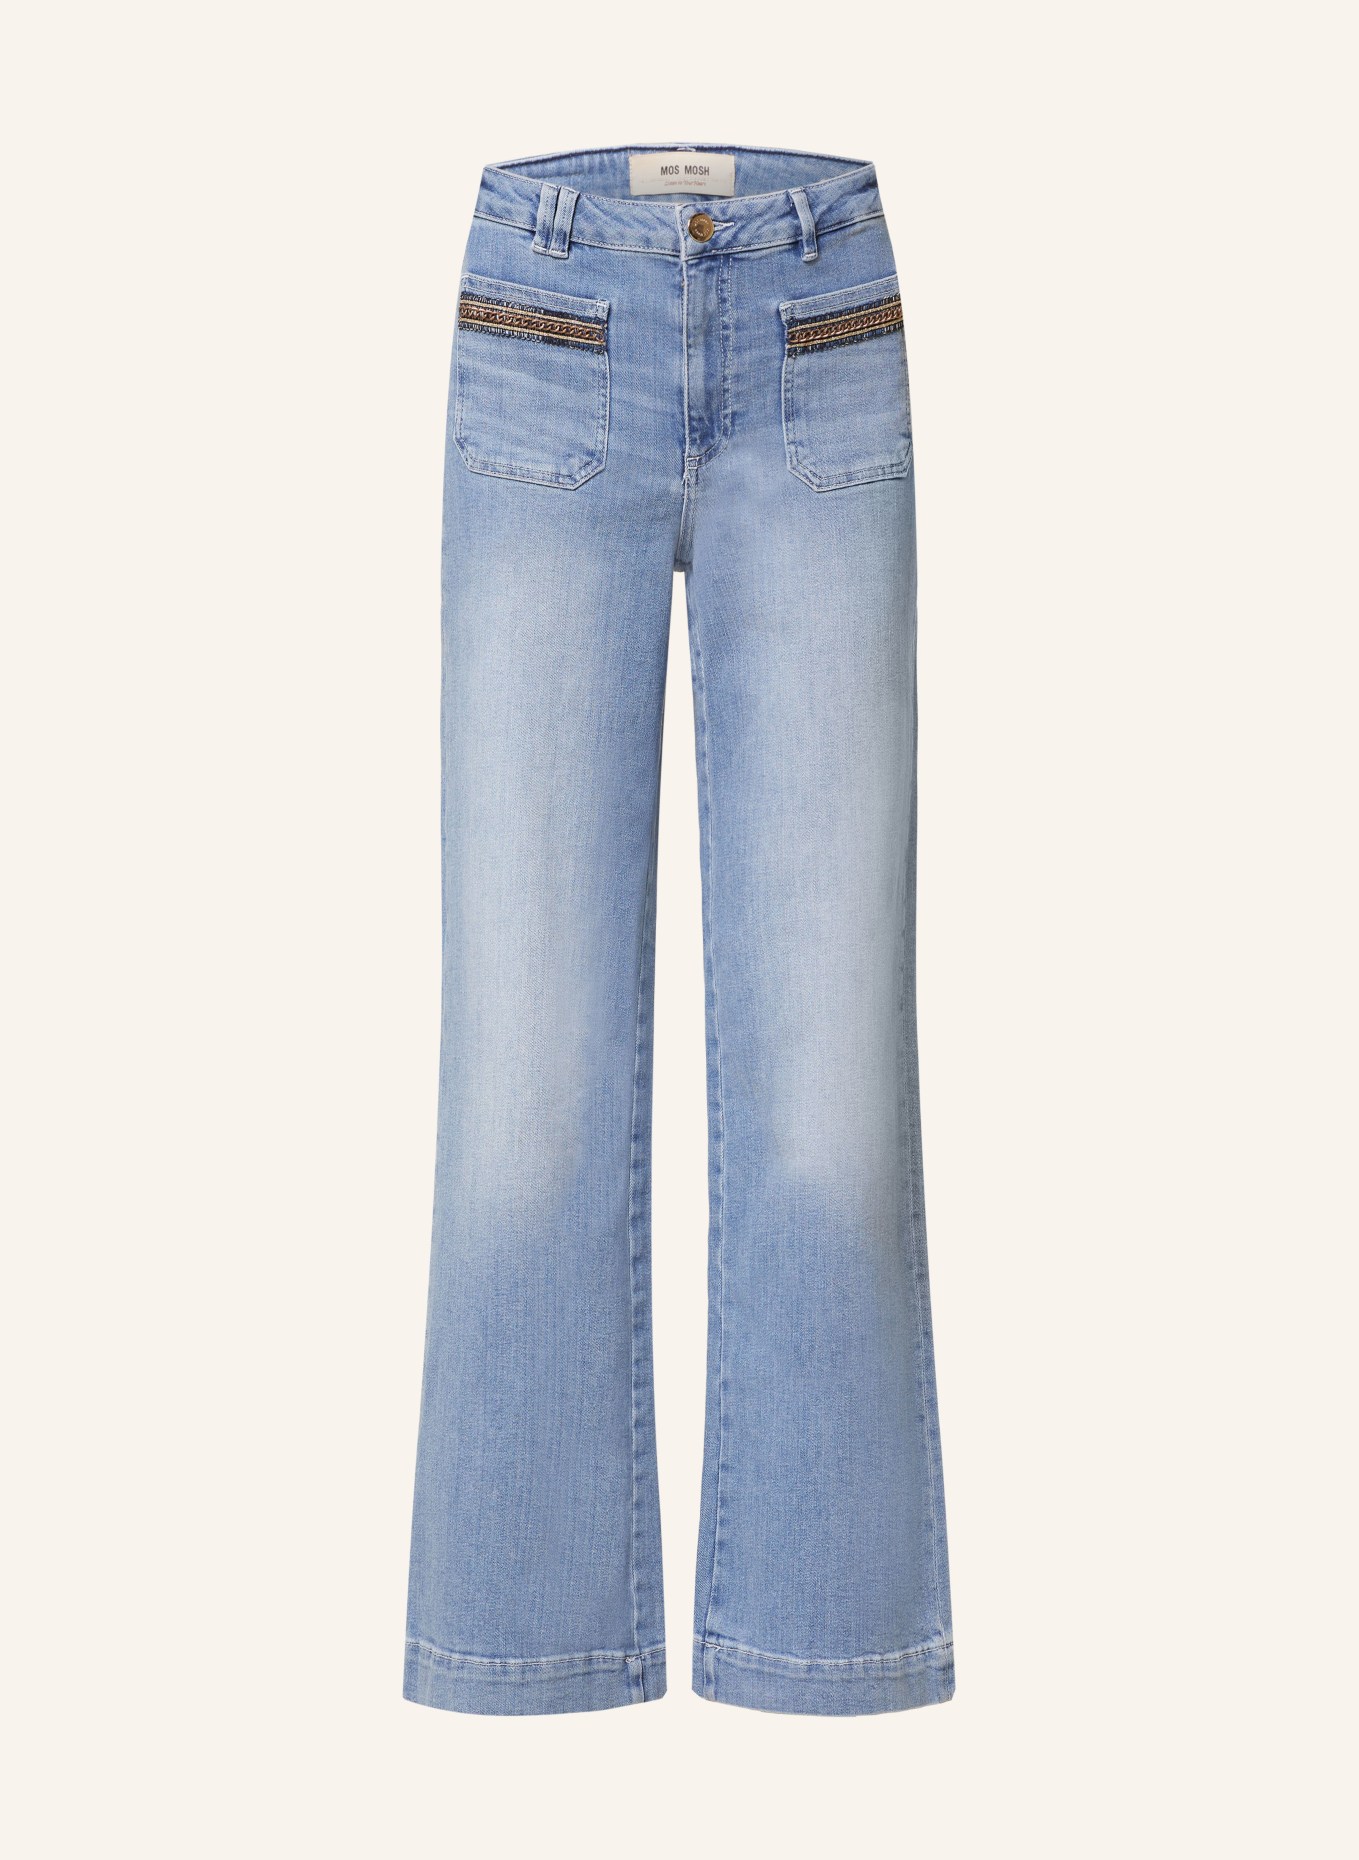 MOS MOSH Flared Jeans MMCOLETTE, Farbe: 401 BLUE (Bild 1)